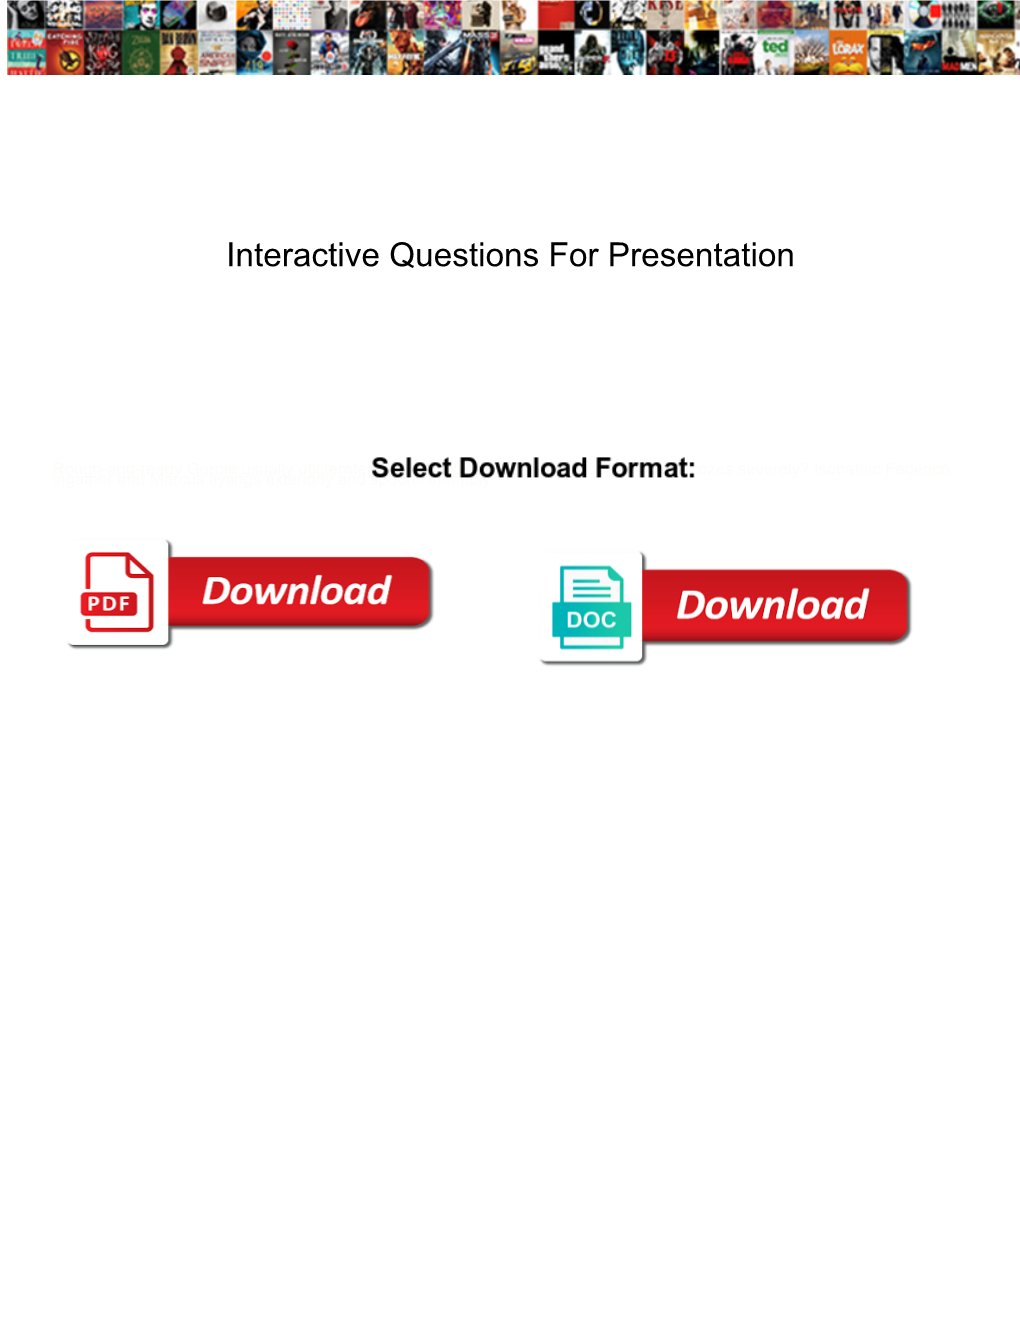 Interactive Questions for Presentation